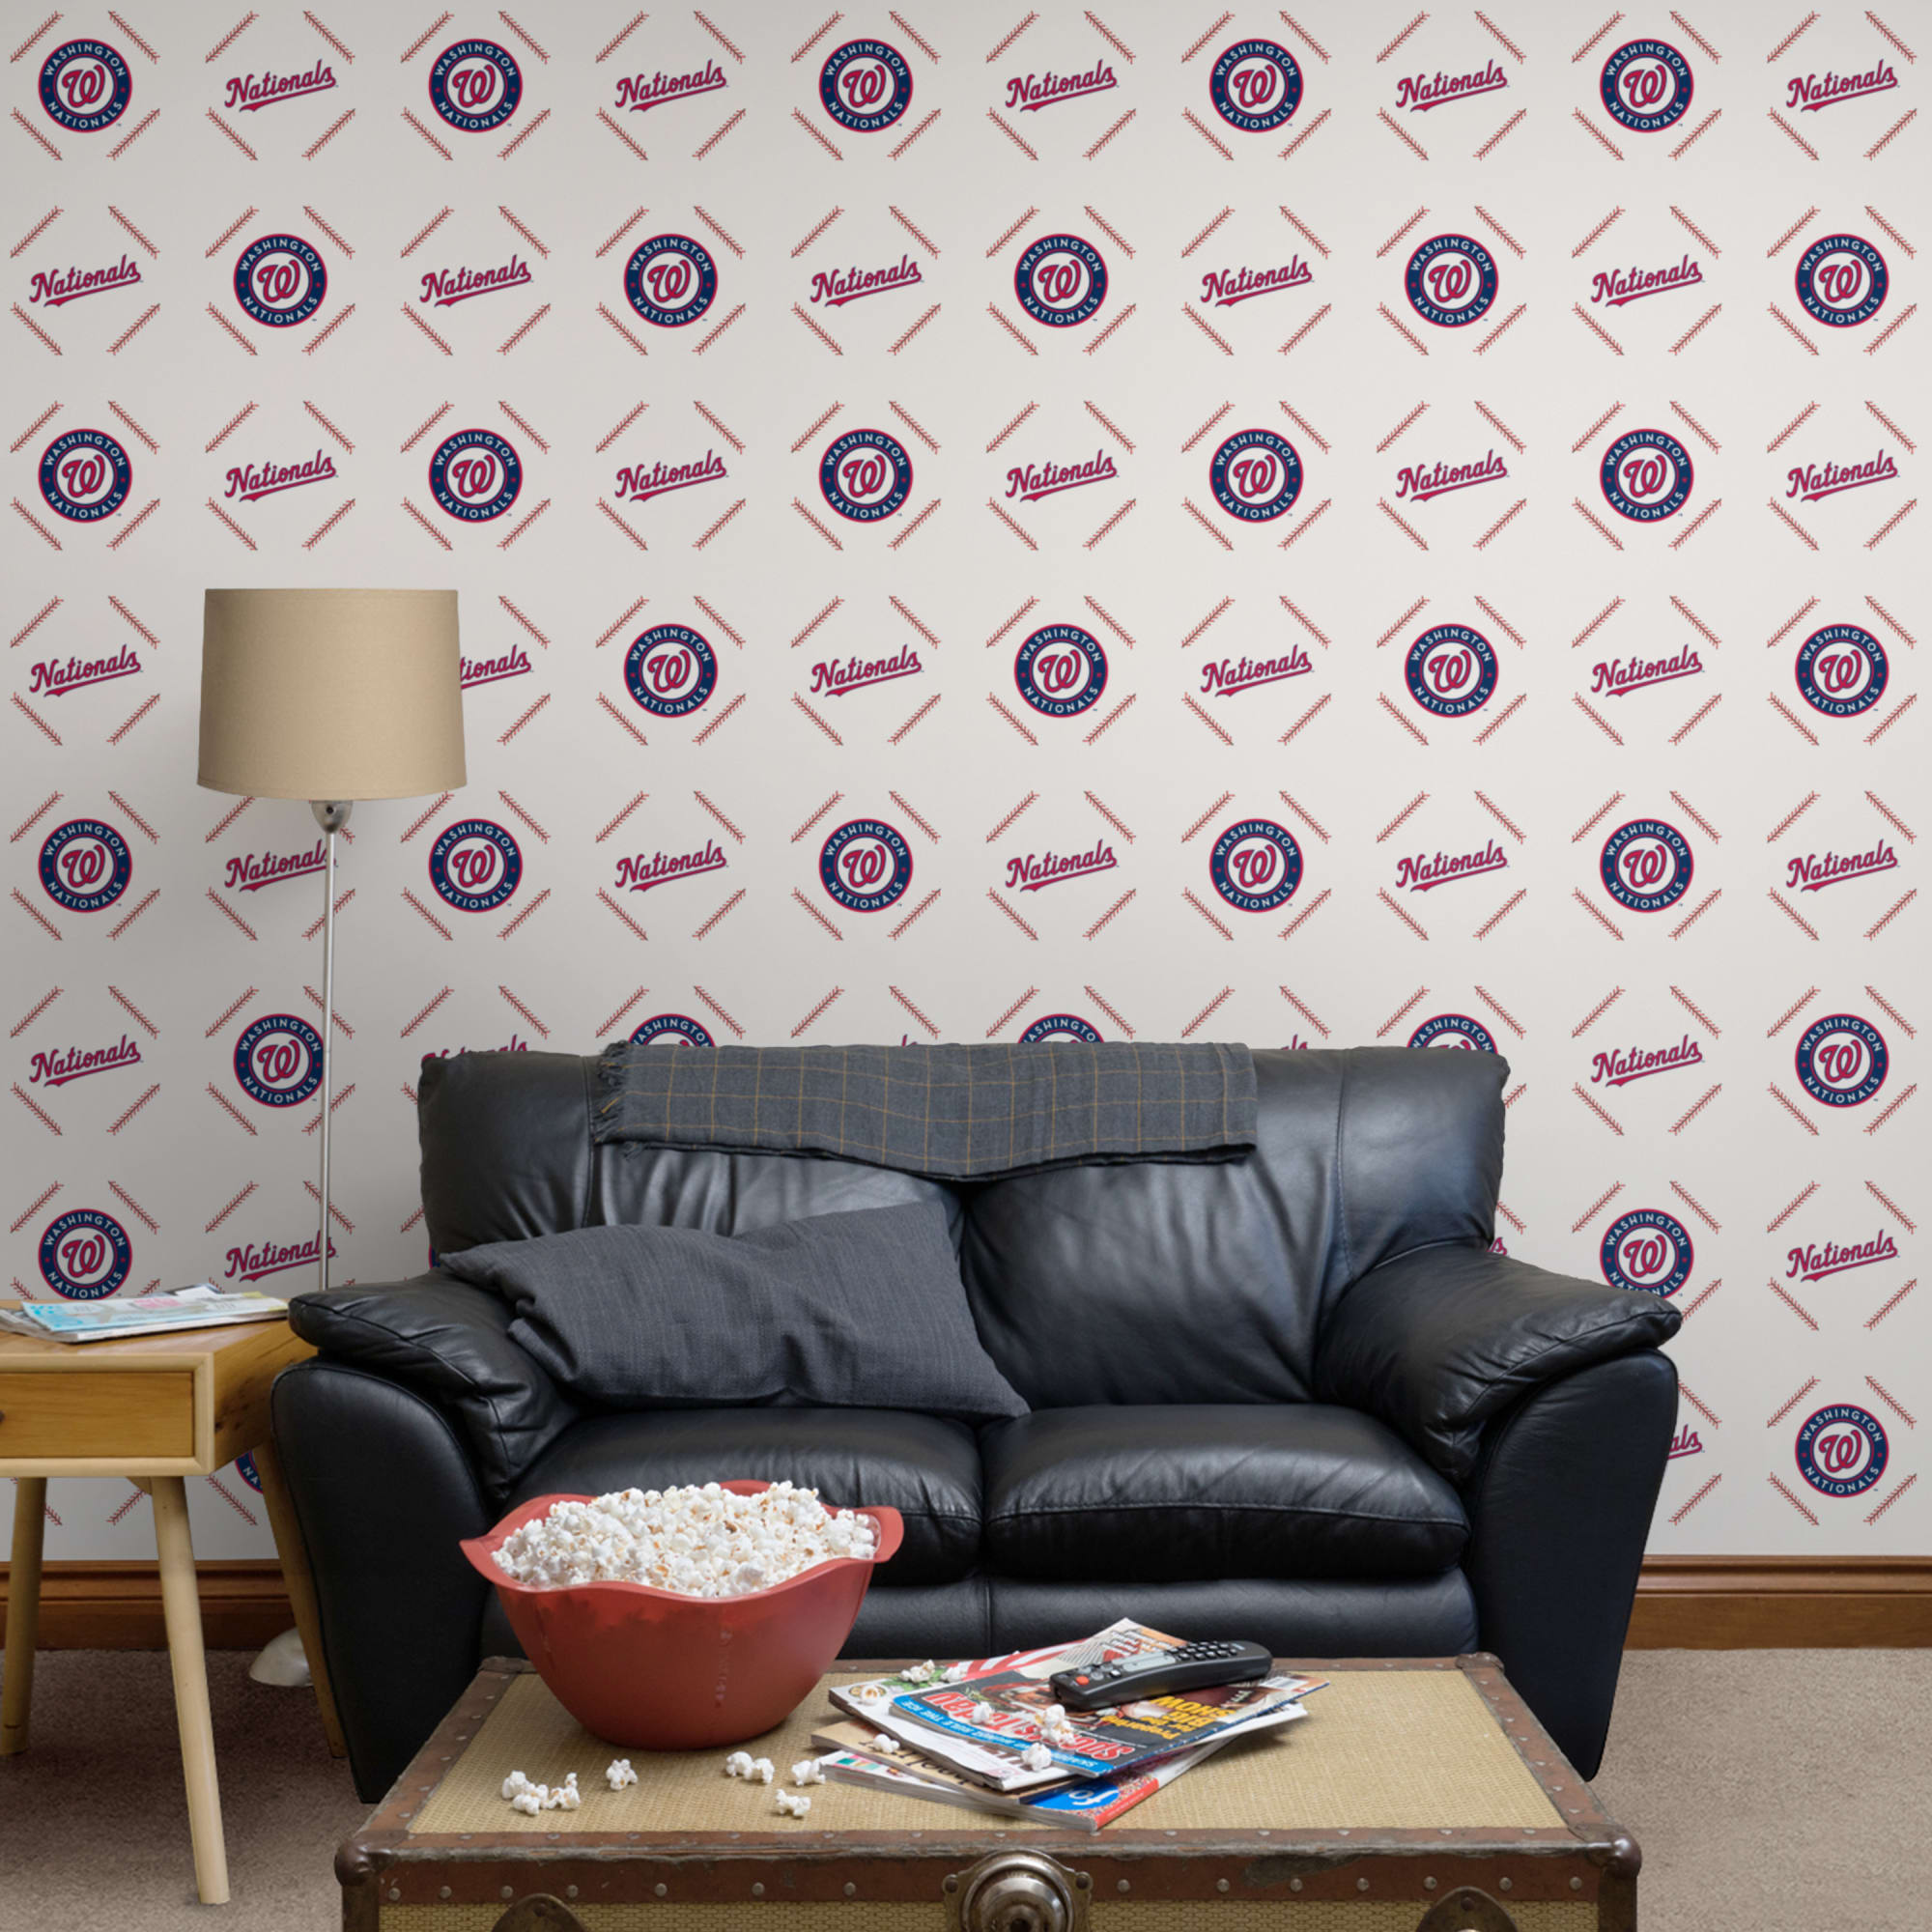 Washington Nationals: Stitch Pattern - Officially Licensed Removable Wallpaper 12" x 12" Sample by Fathead